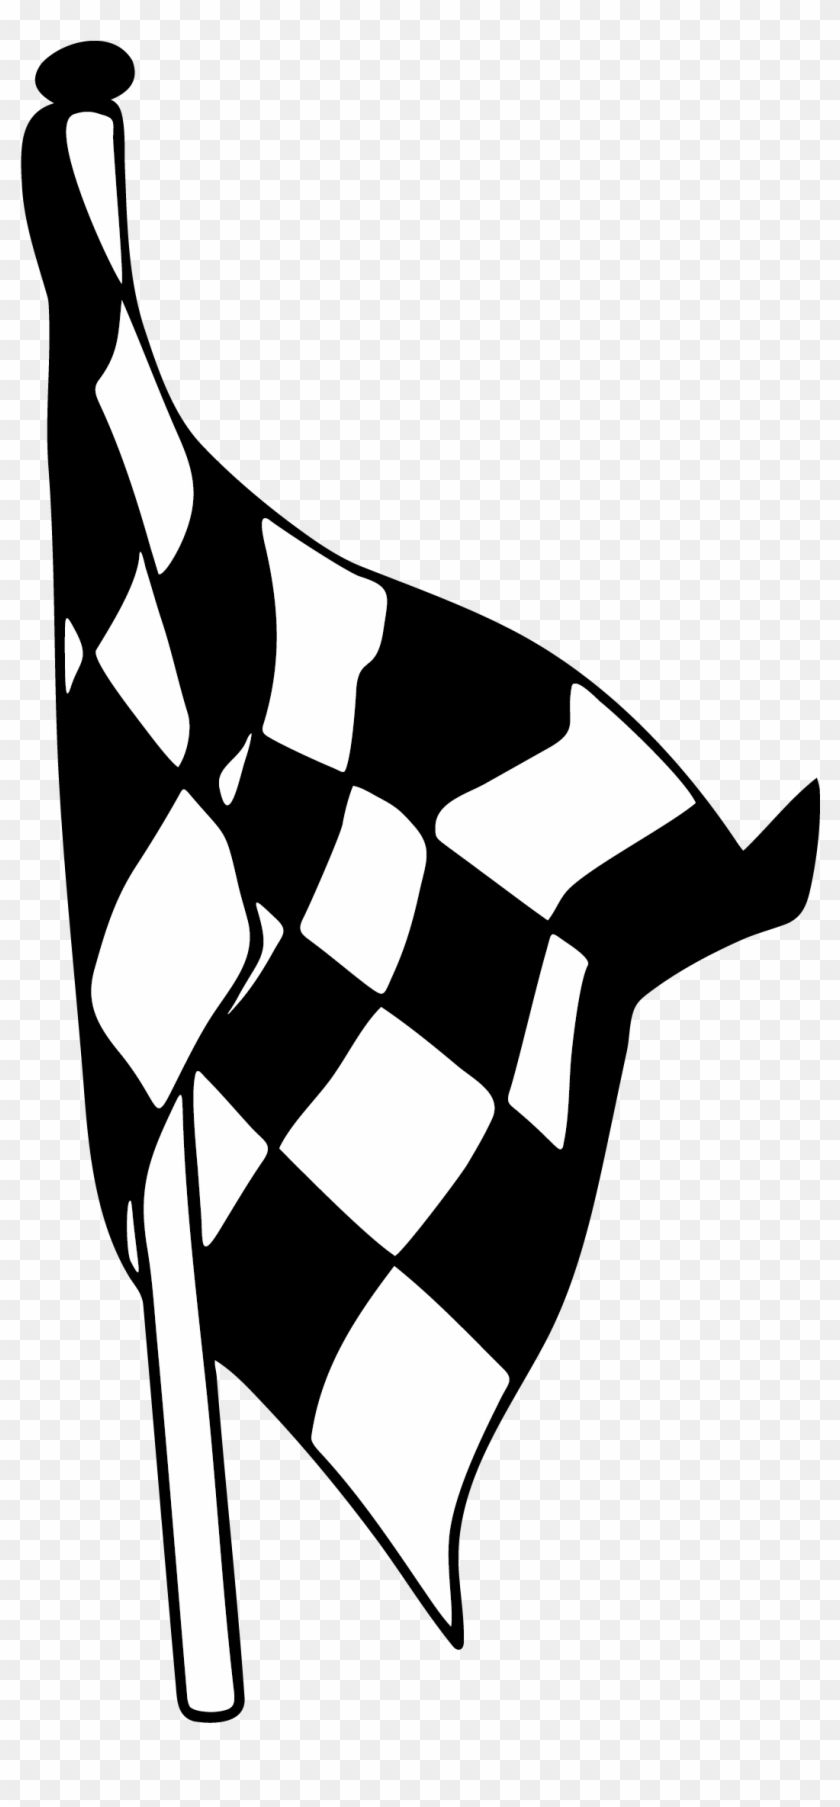 Formula One Racing Flags Flag Of The United States - Racing Flags #1148051